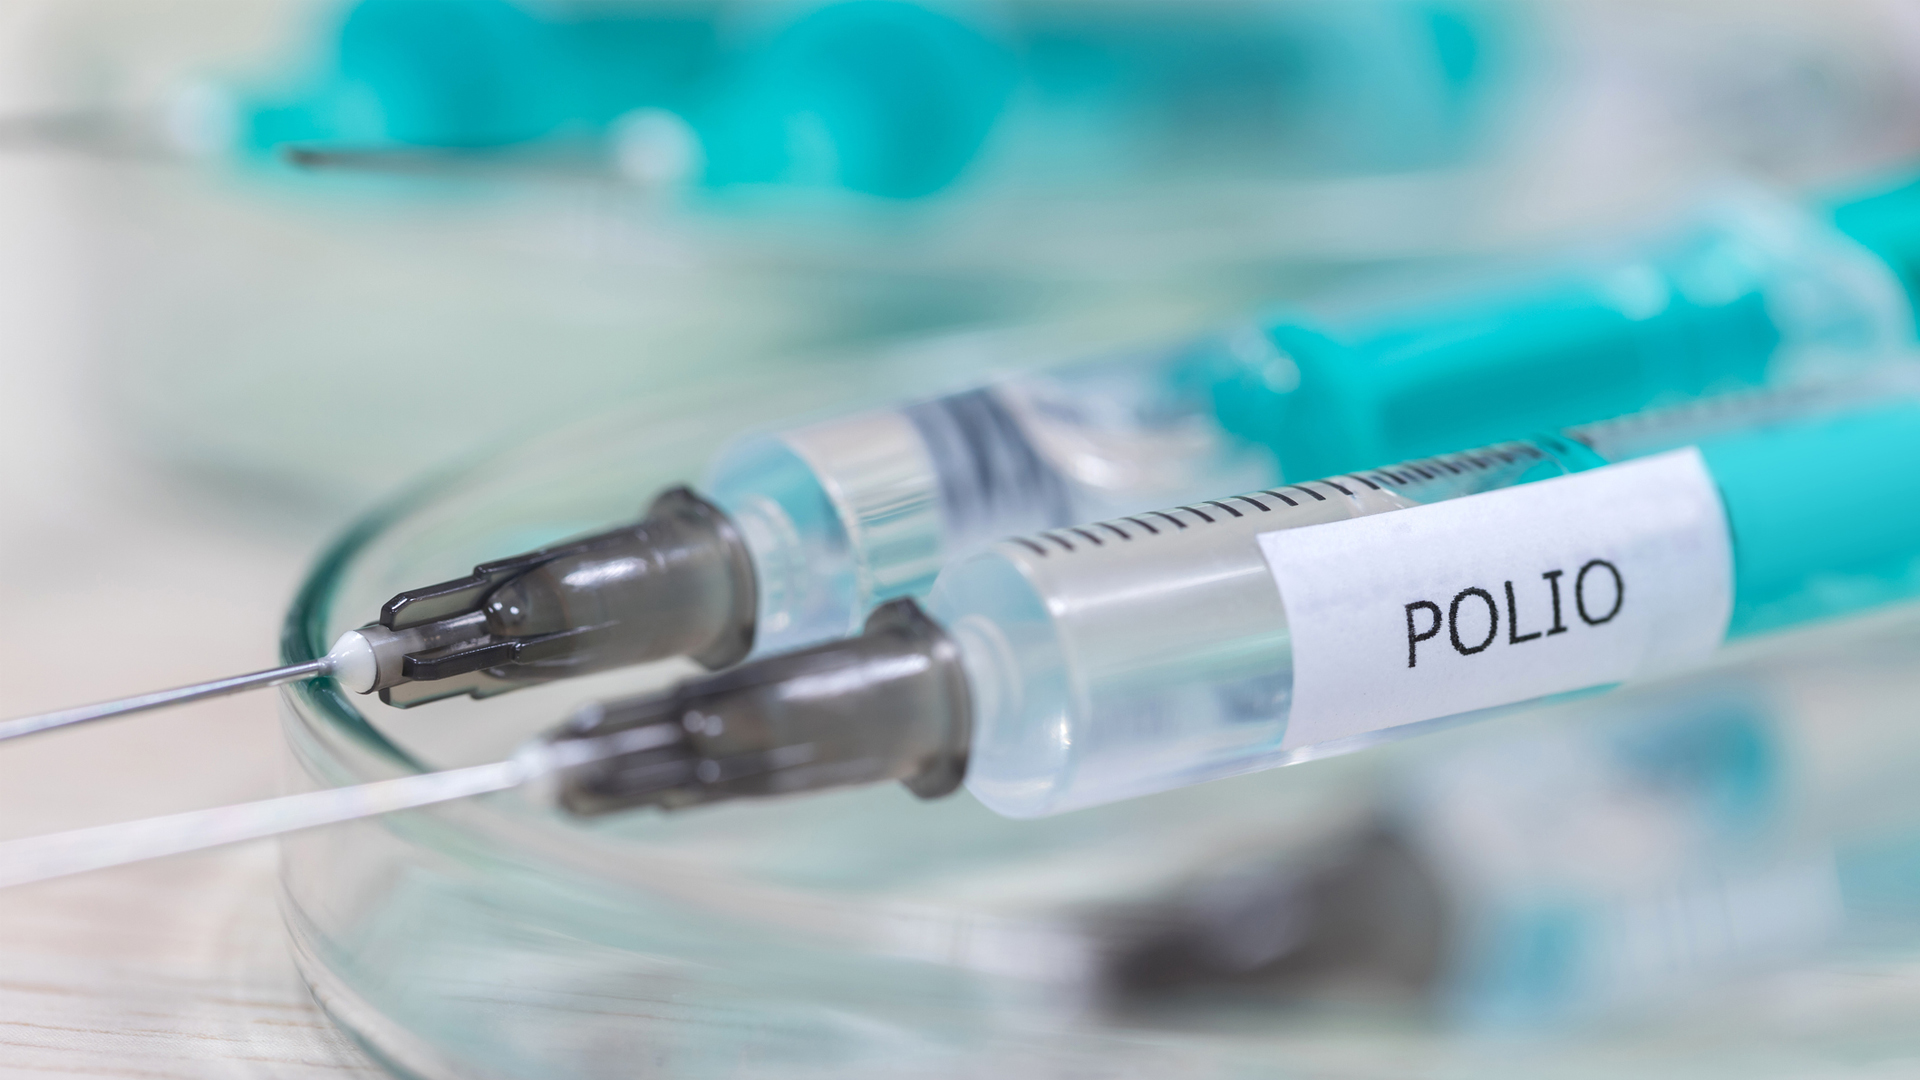 Could COVID-19 lead to measles and polio epidemics?